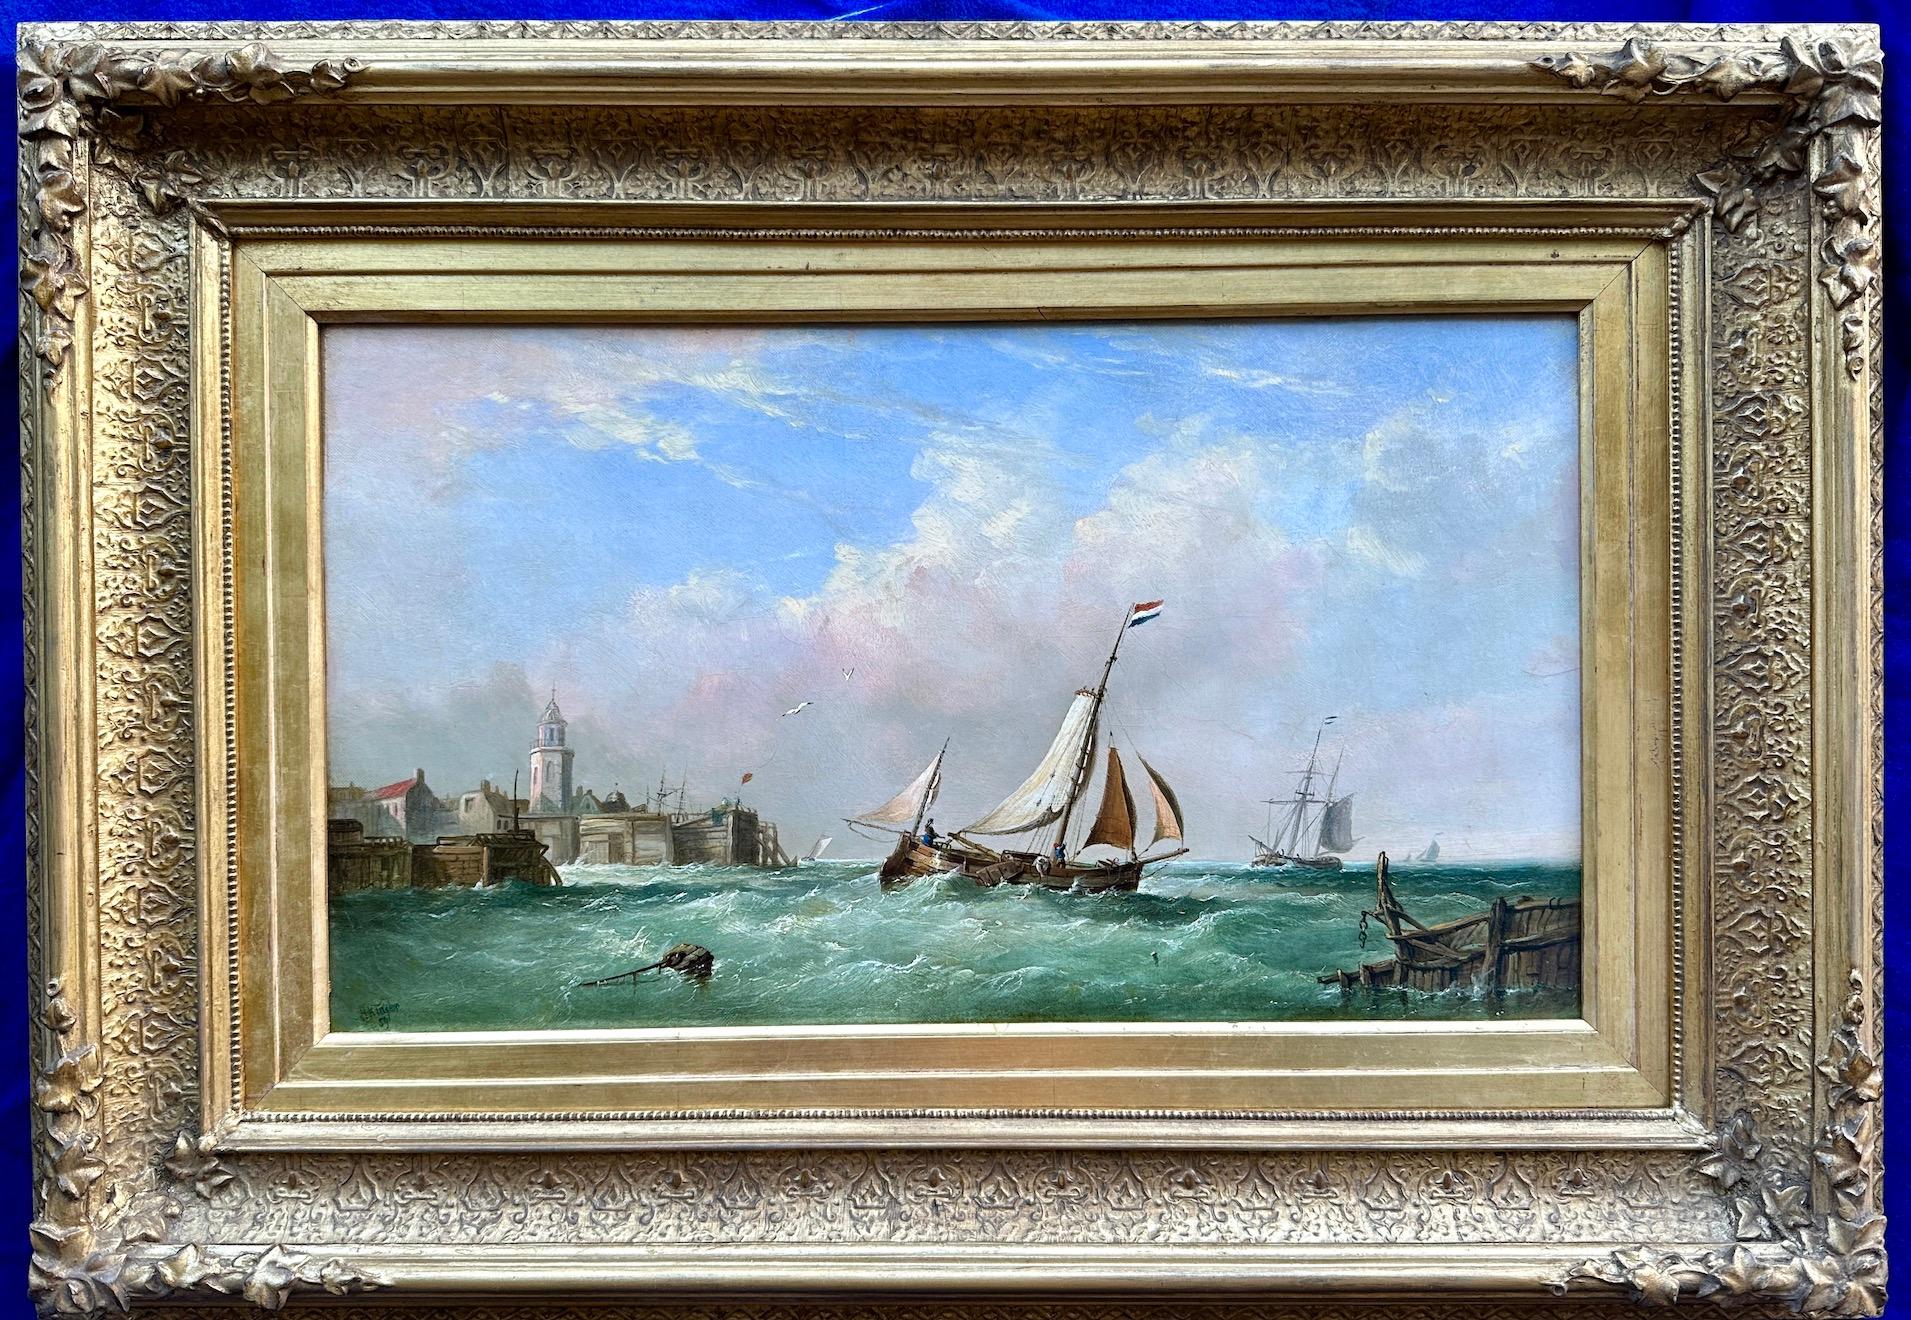 Henry King Taylor Figurative Painting - 19th century English marine Sailing scene of Dutch fishing boats by a harbor 